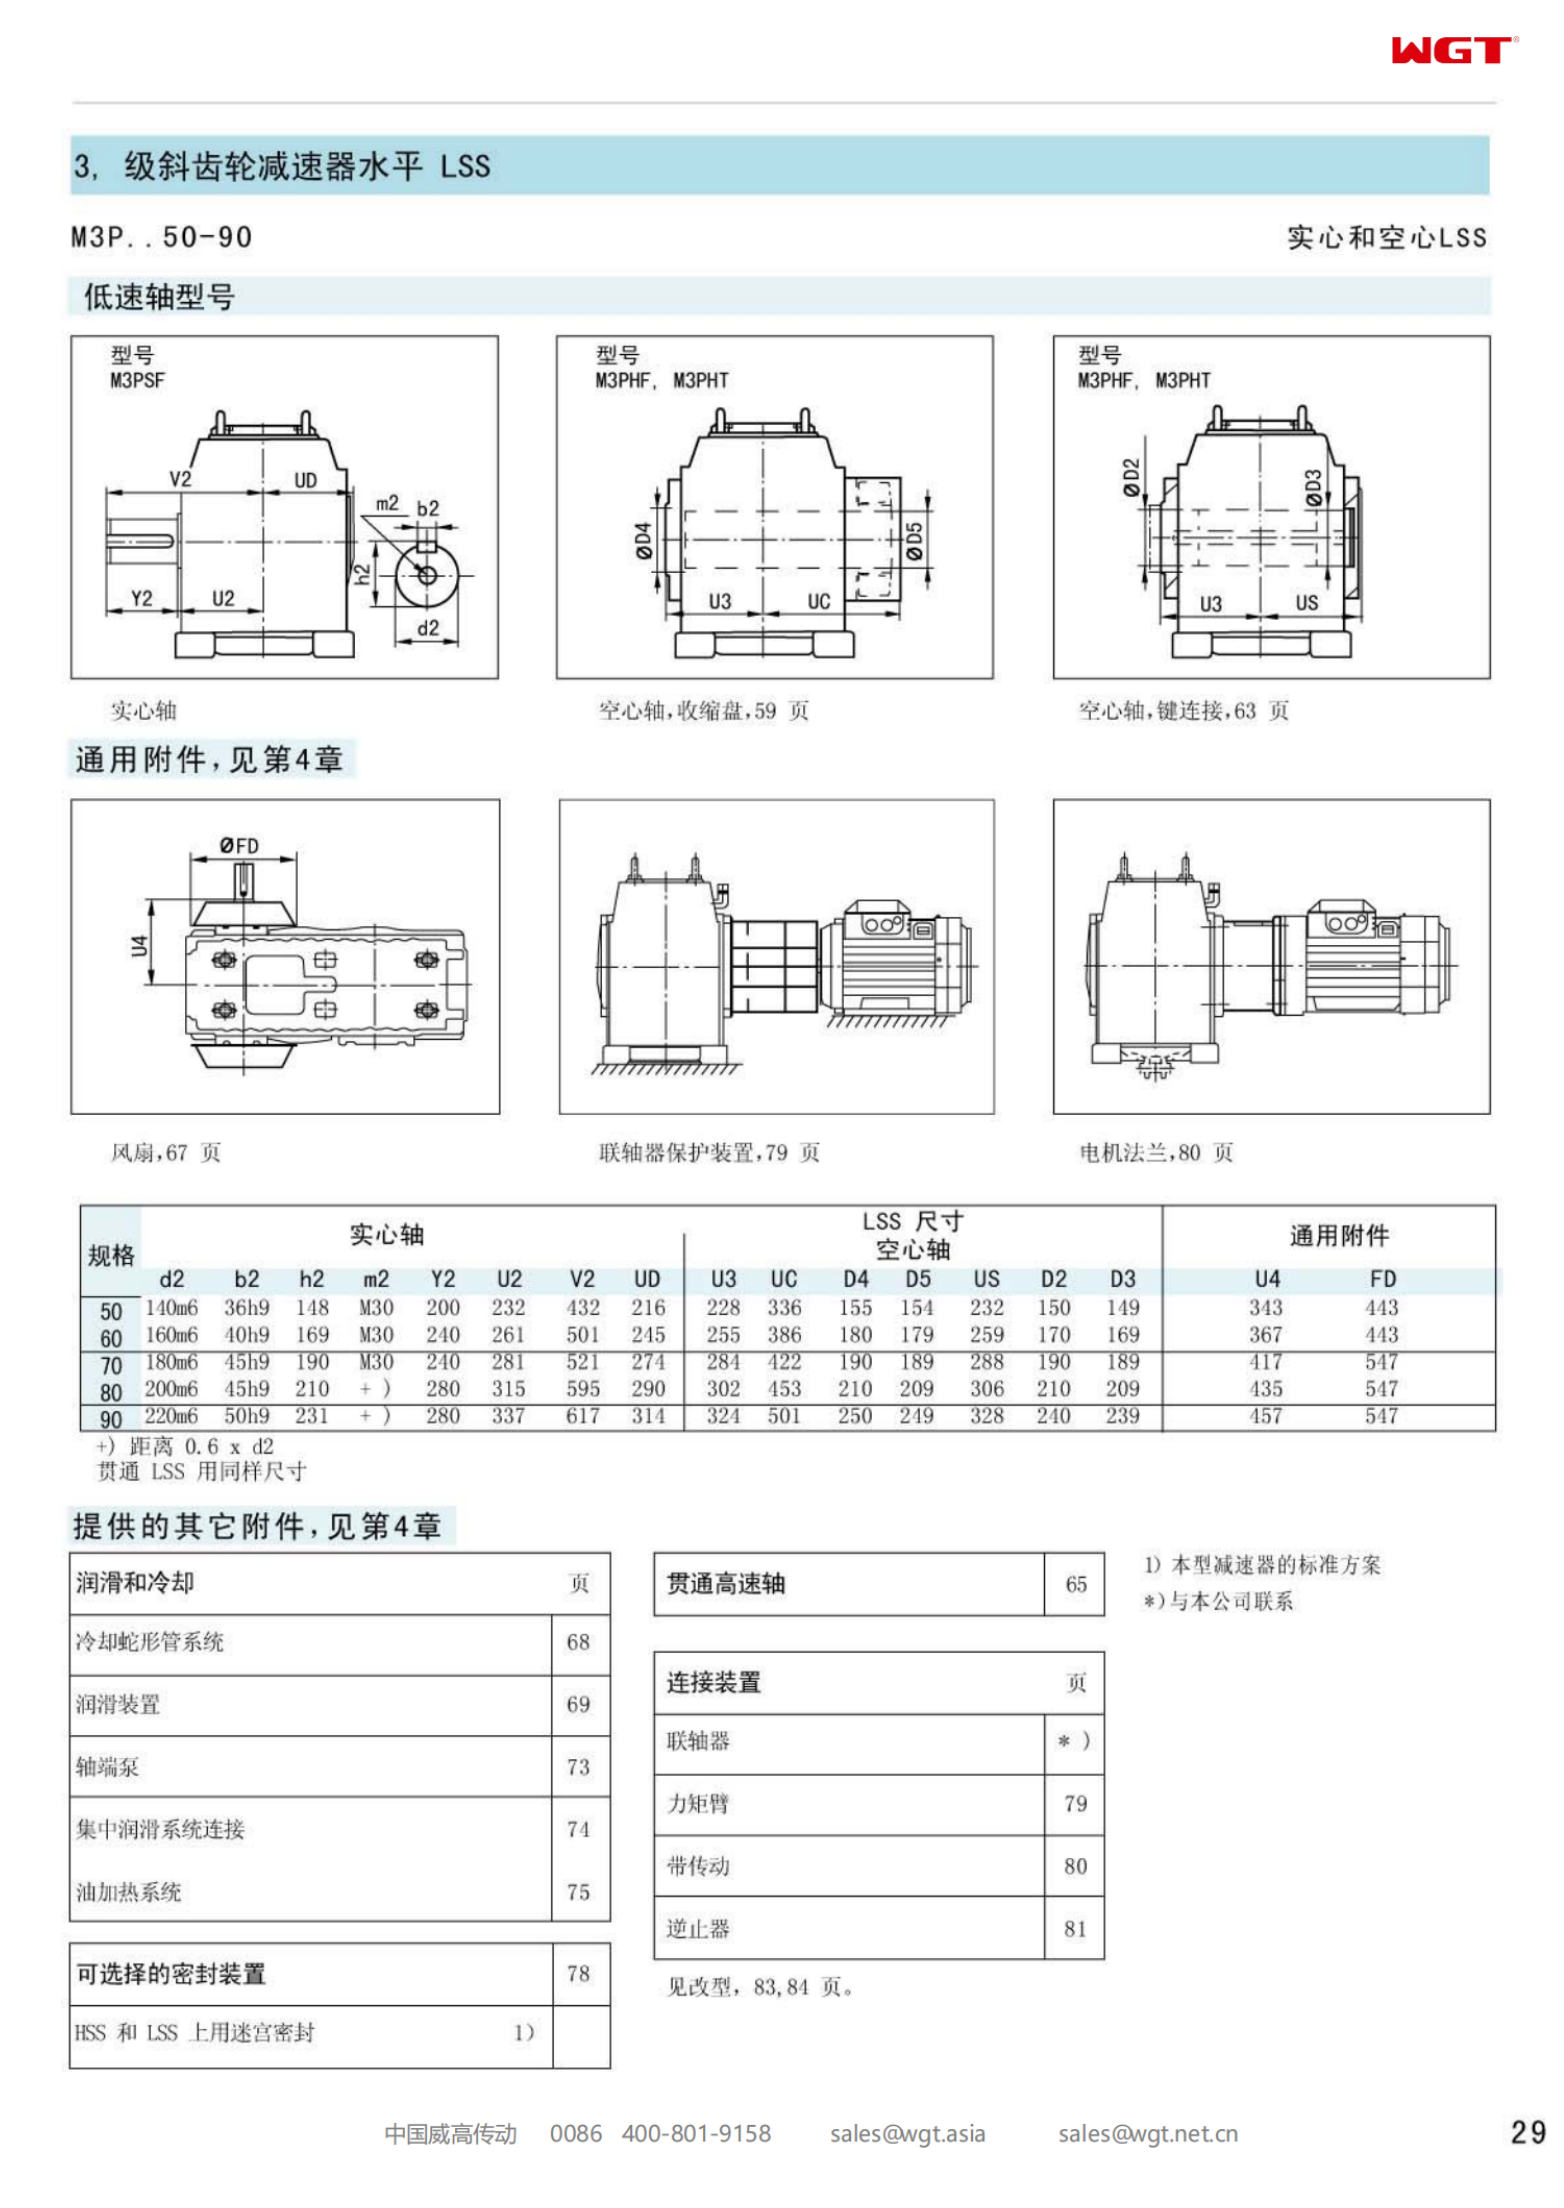 M3PHT80 Replace_SEW_M_Series Gearbox